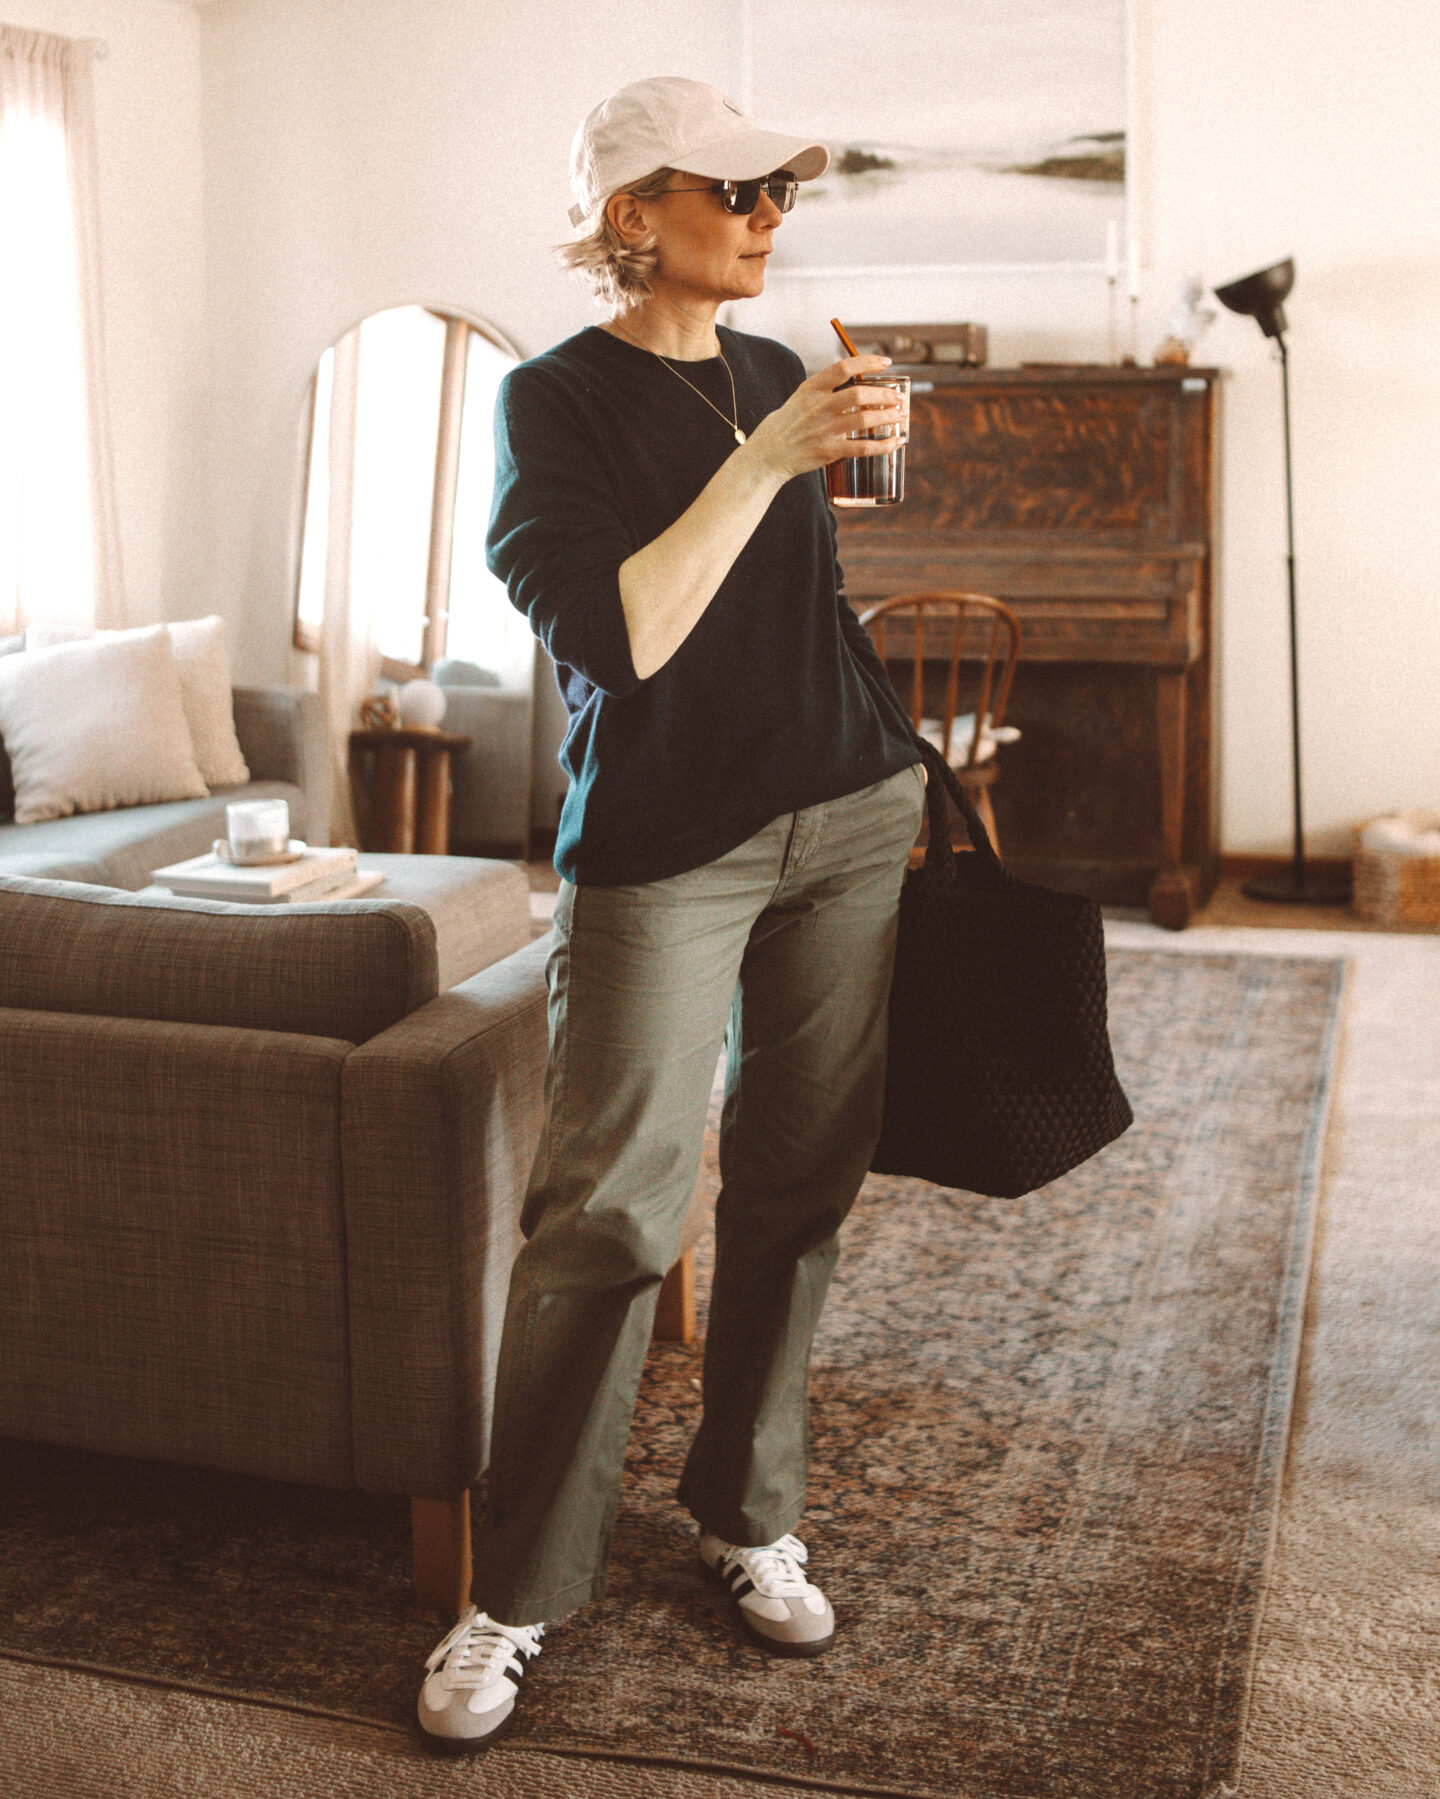 Karin Emily wears a navy blue cashmere sweater and green khaki sailor trousers from J. Crew with a pair of adidas samba sneakers and a naghedi st. Barths bag